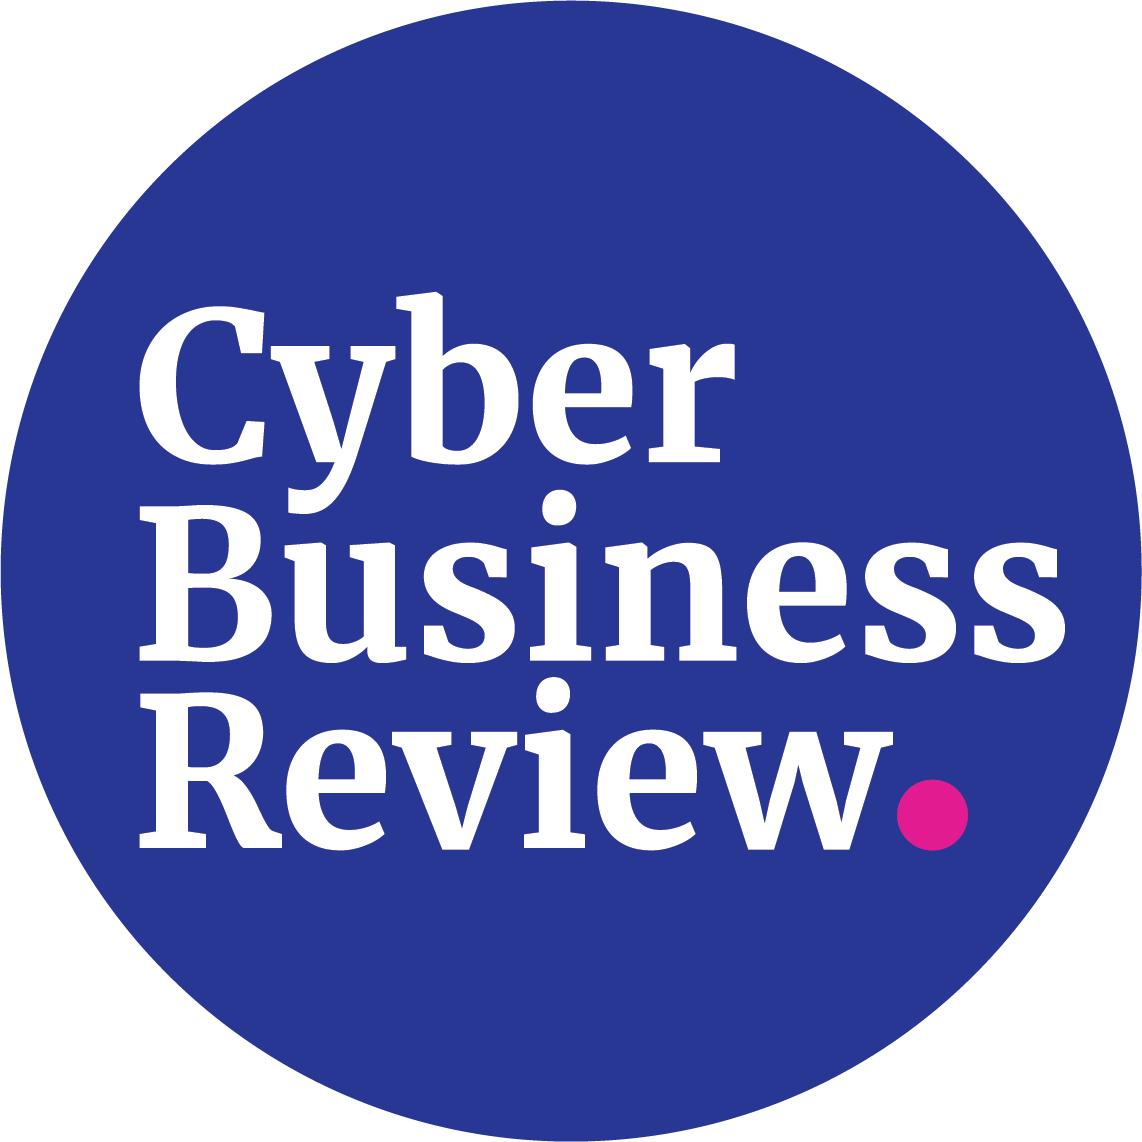 Cyber Business Review_logo.png